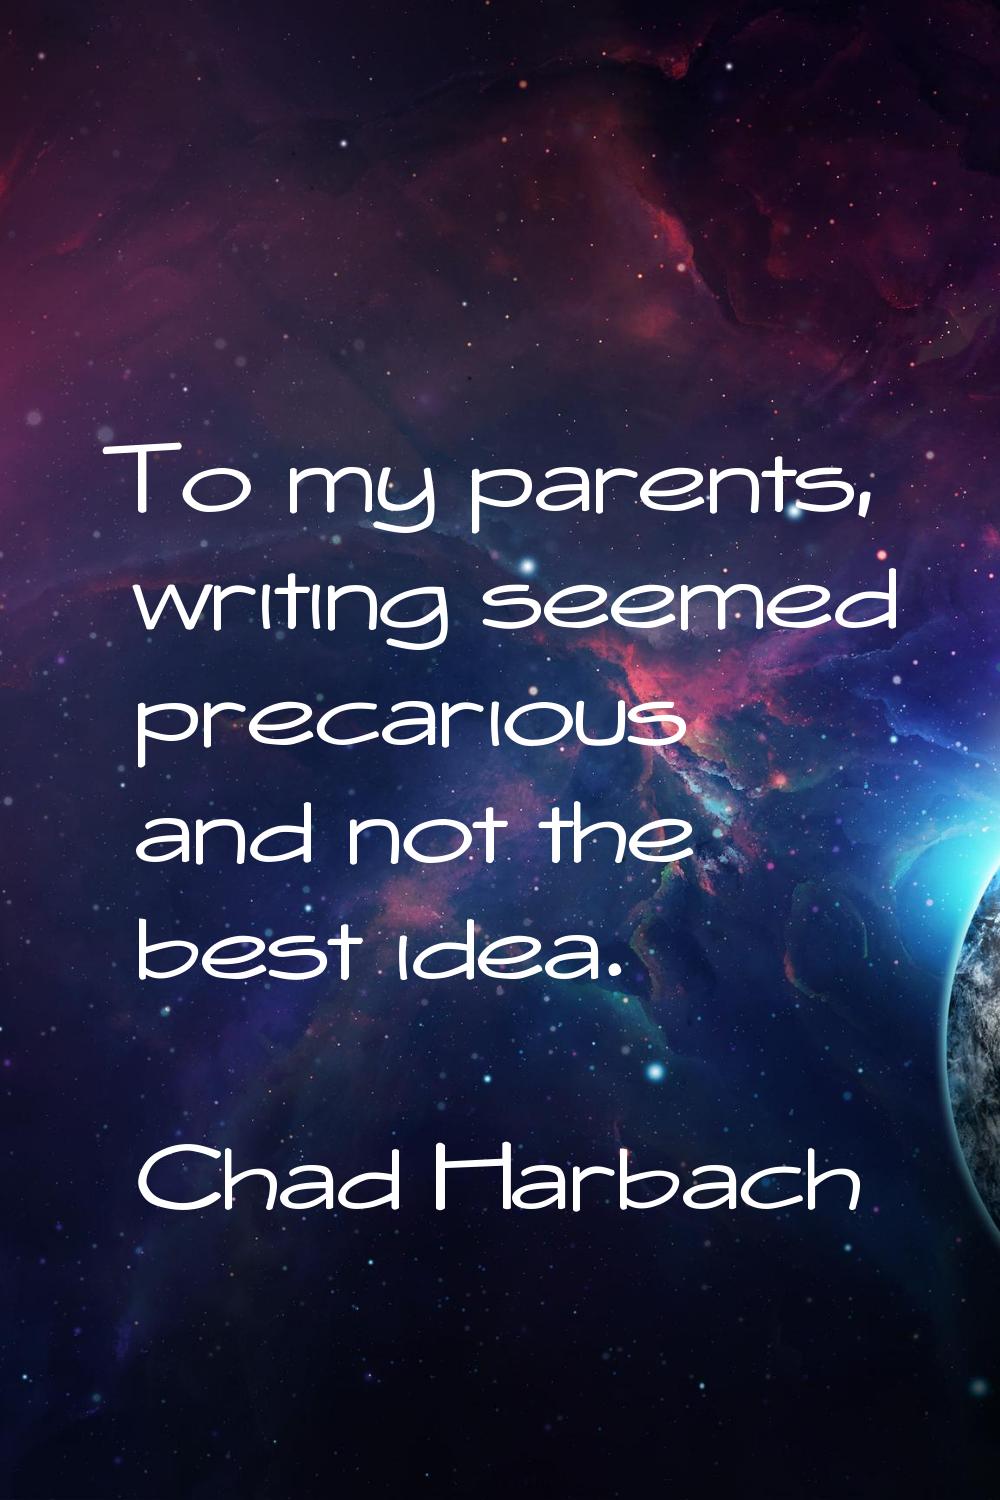 To my parents, writing seemed precarious and not the best idea.